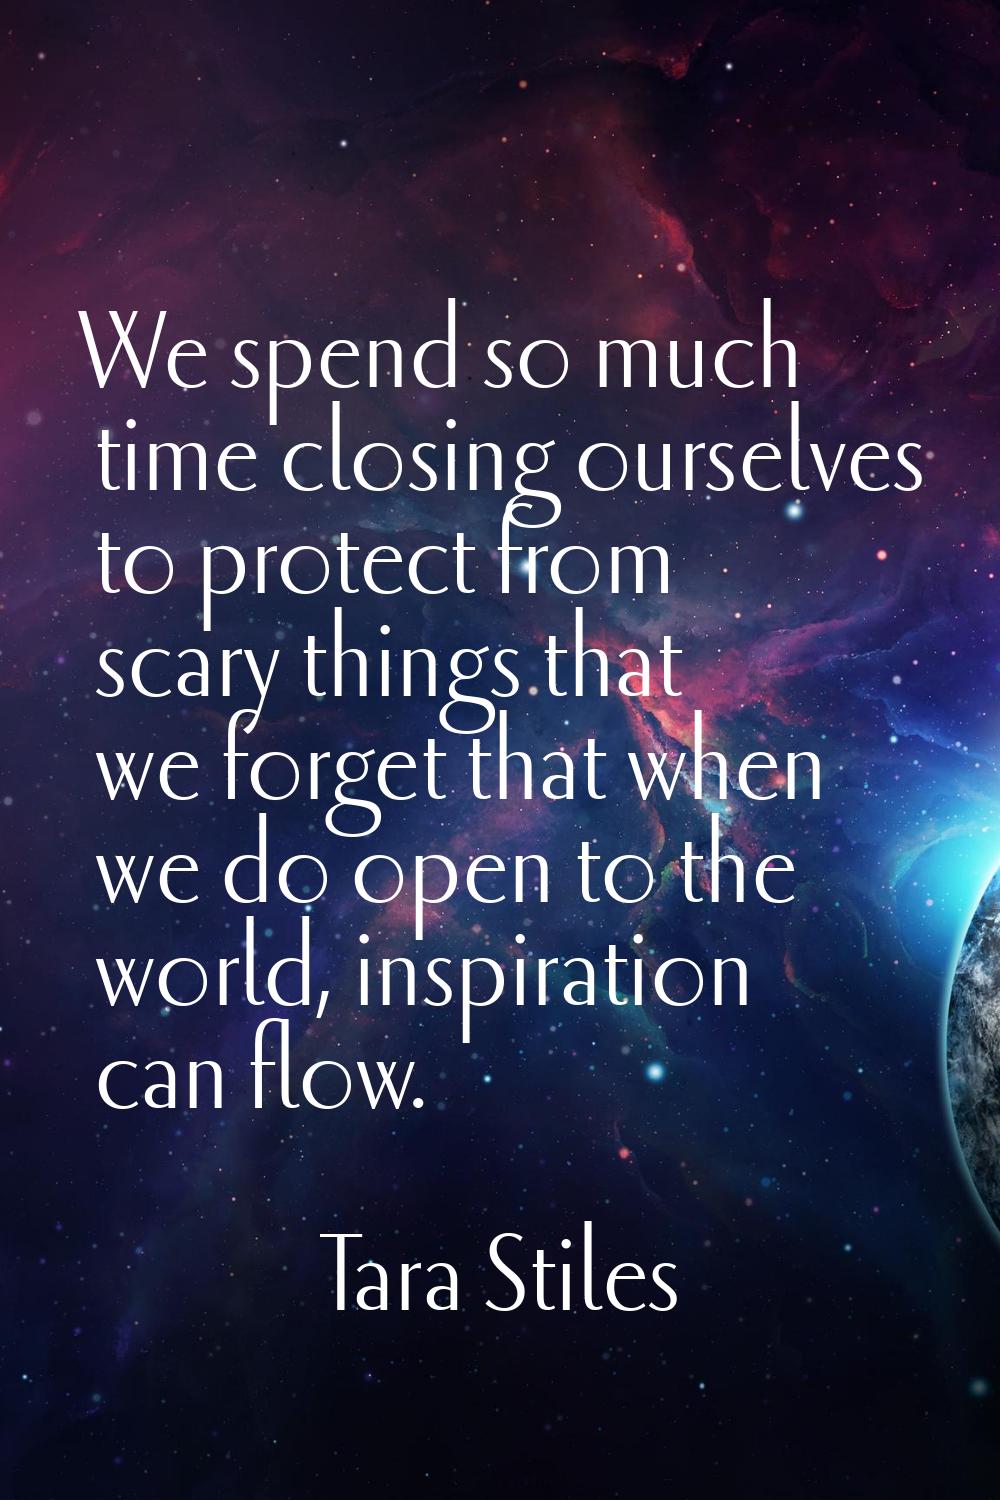 We spend so much time closing ourselves to protect from scary things that we forget that when we do